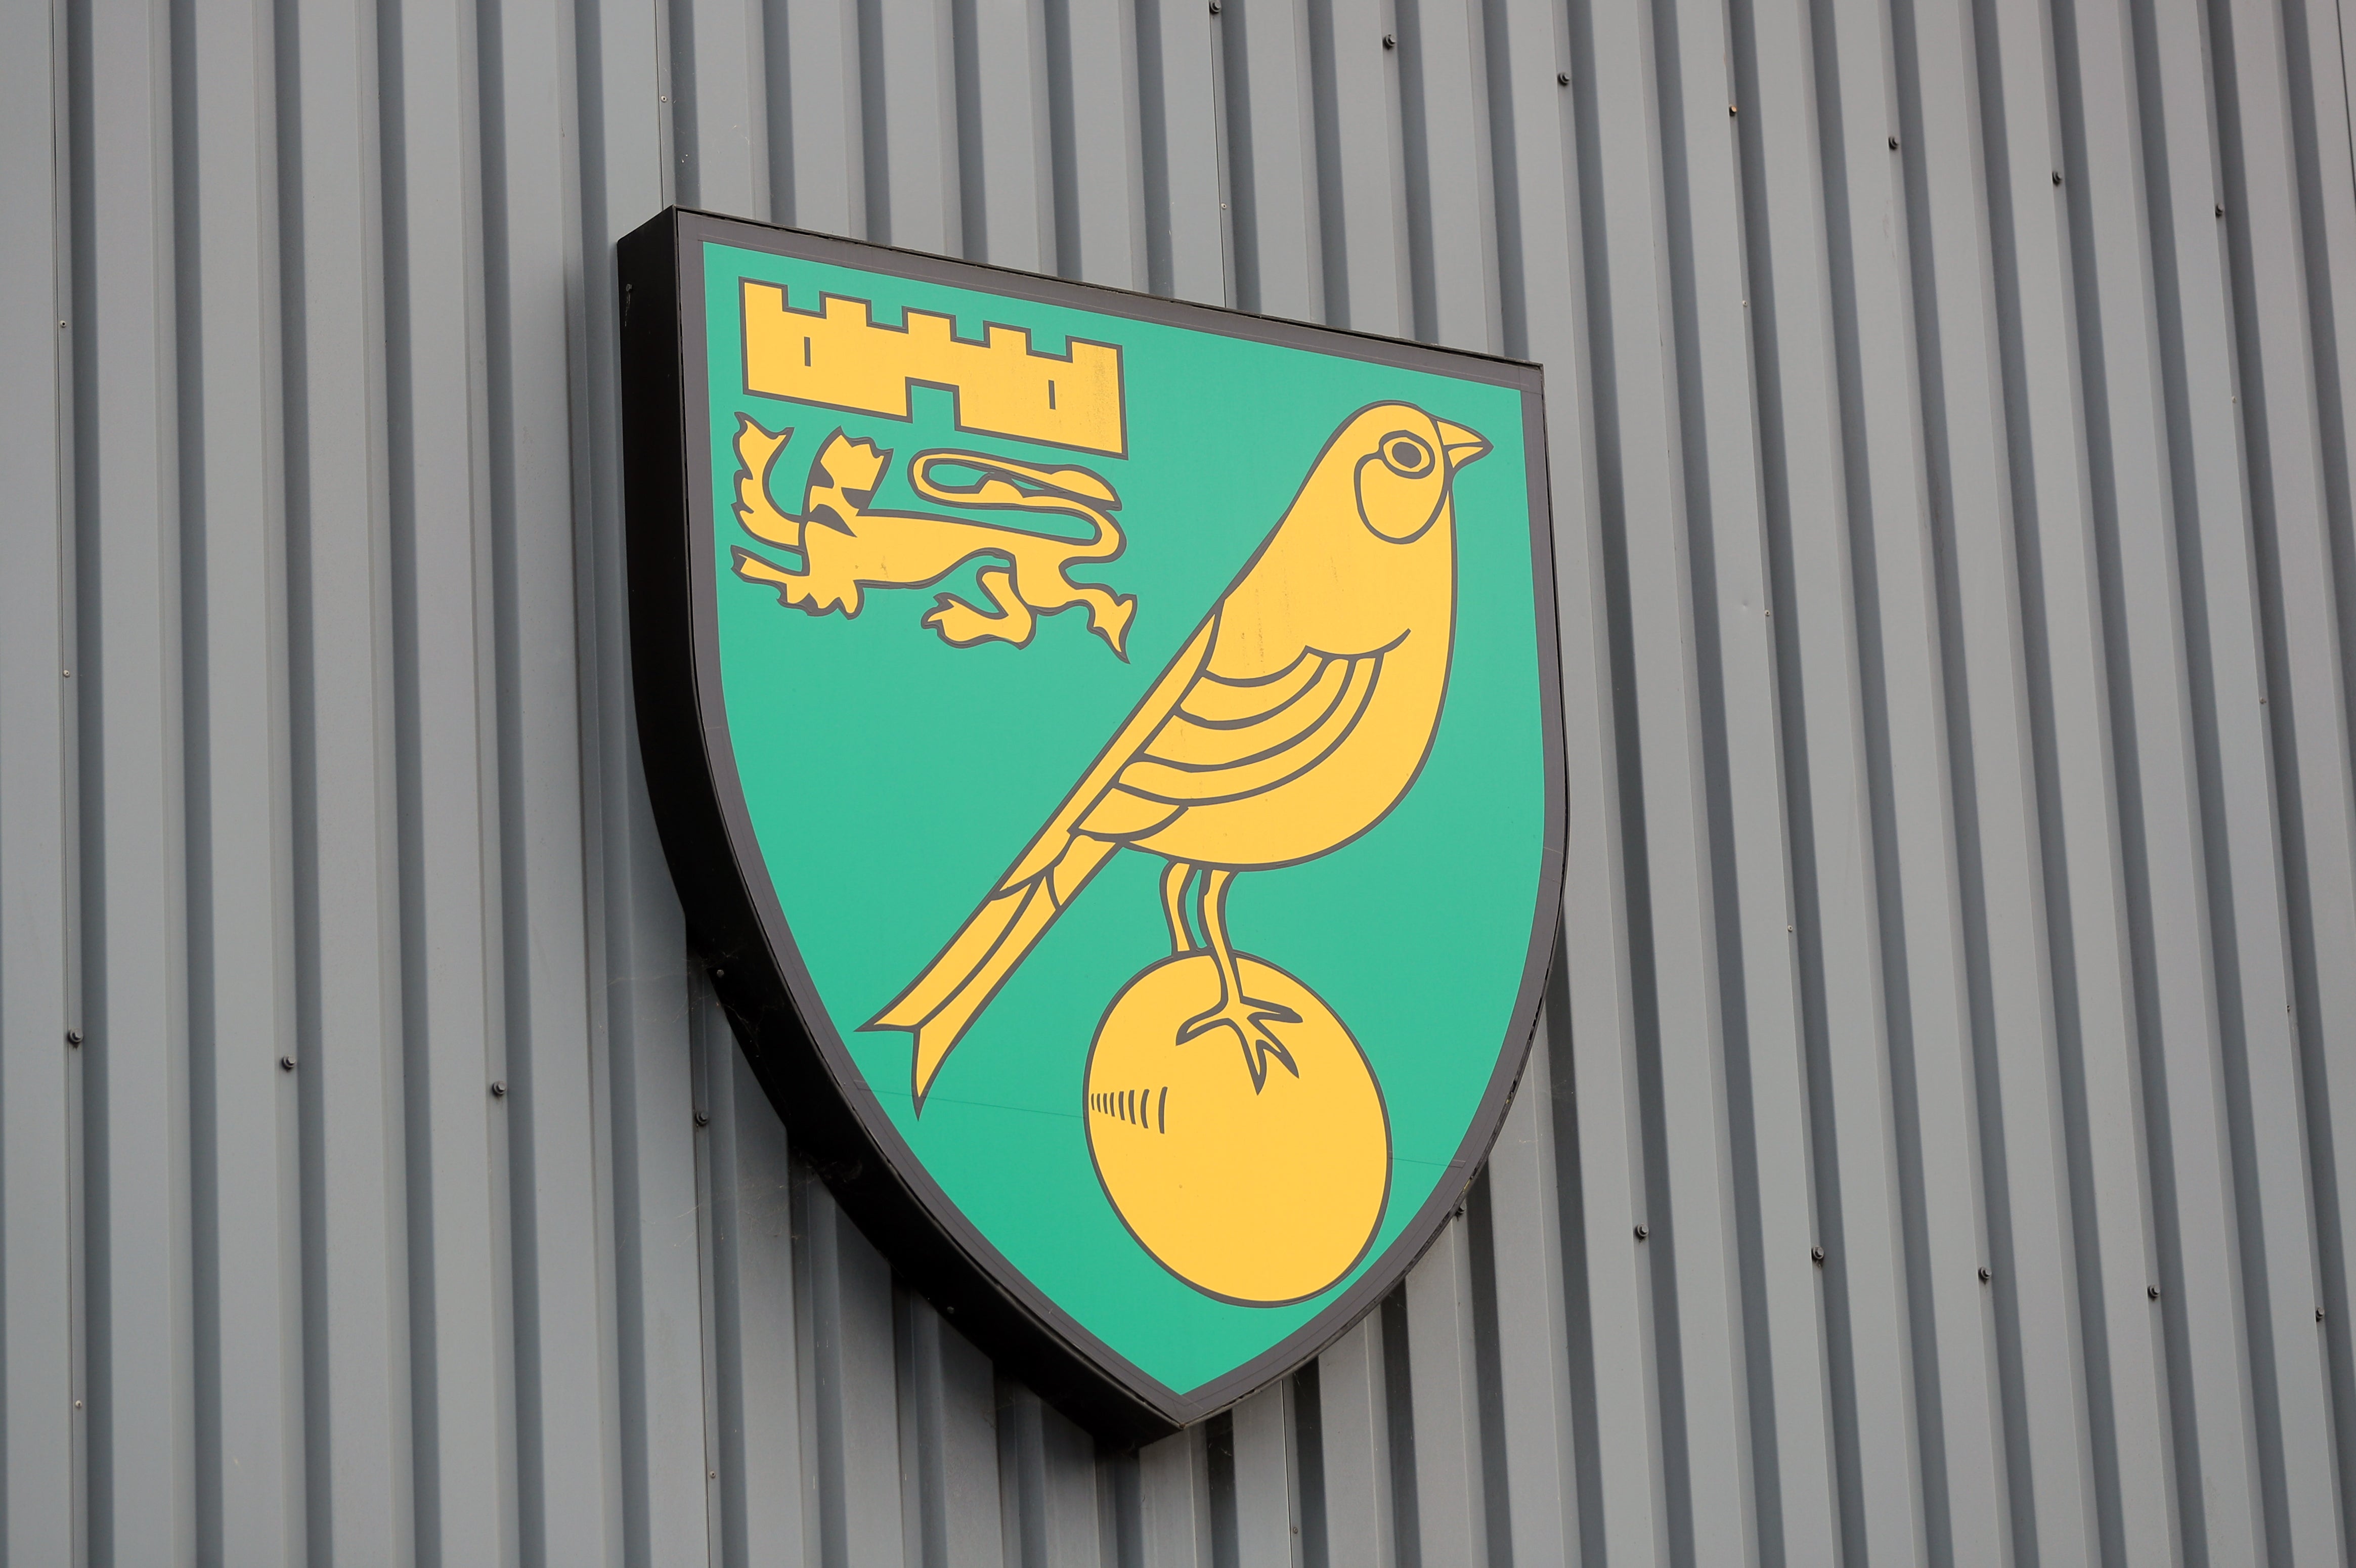 The Norwich crest at Carrow Road